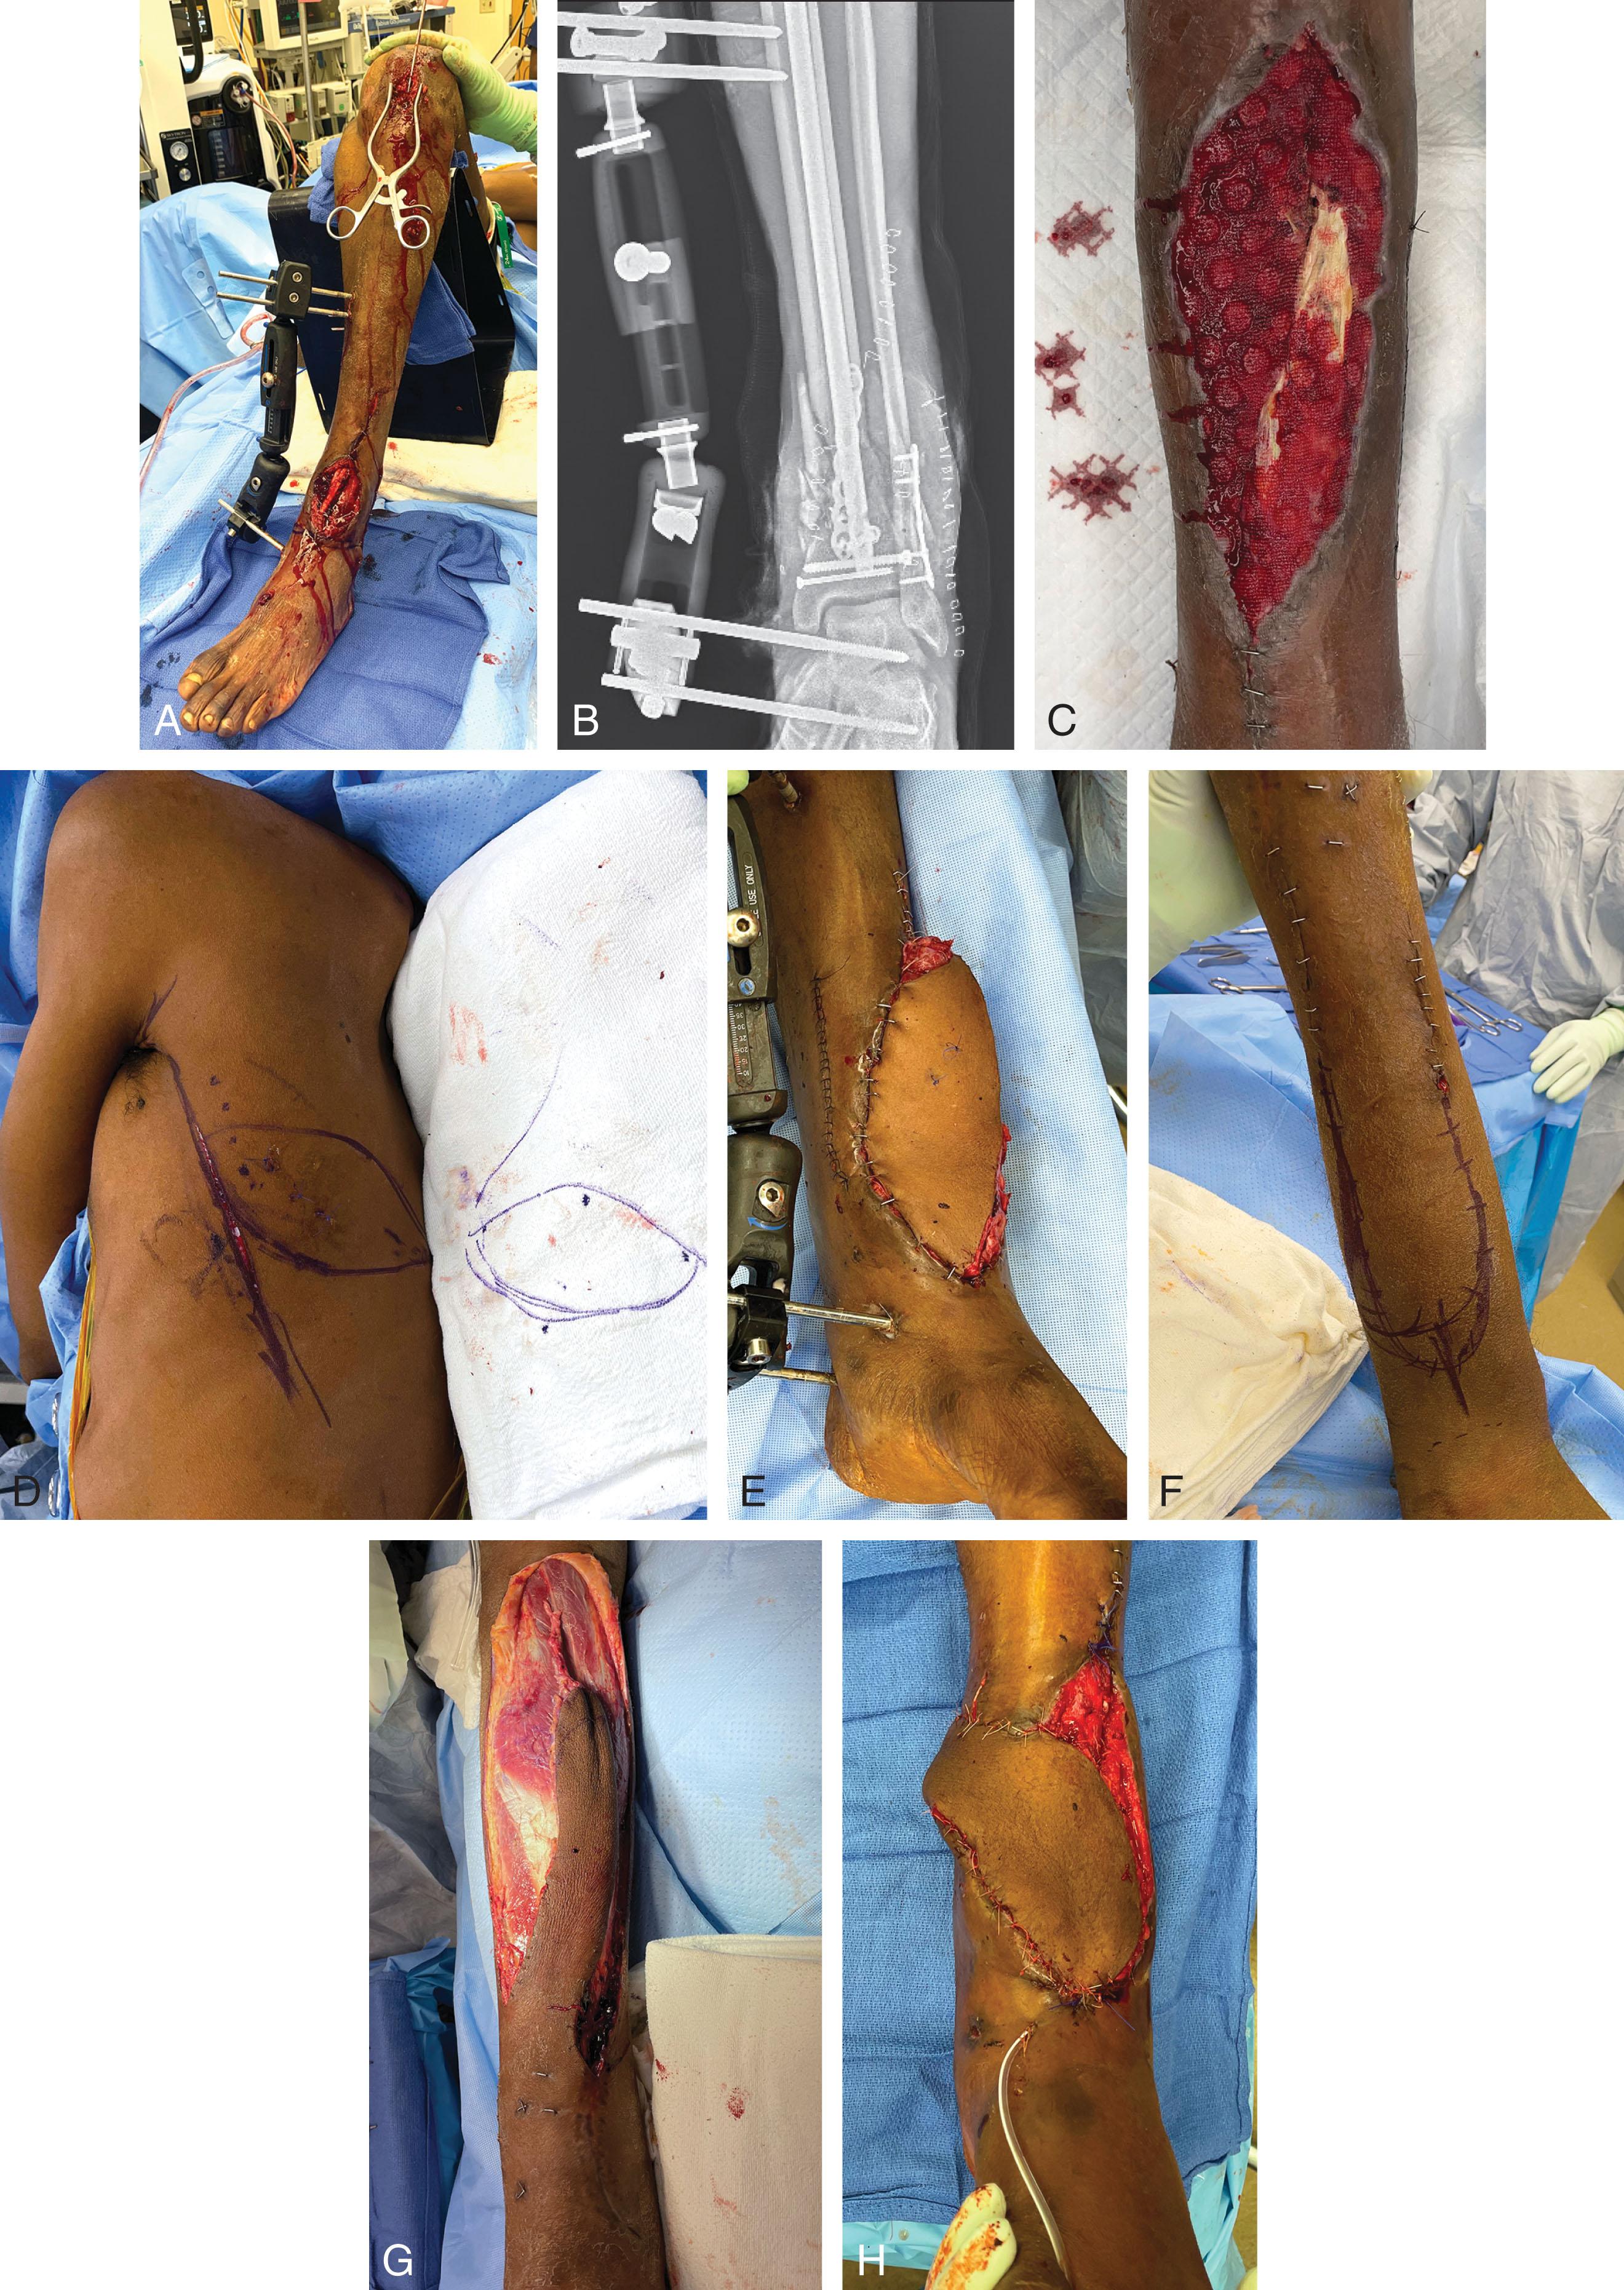 Fig. 42-3, A , High velocity gunshot wound (GSW) to distal tibia/ankle with transection of major vessels and pilon fracture. External fixation was performed to stabilize the bone, followed by microvascular repair. To minimize any further soft tissue stripping, external fixator-assisted intramedullary nailing and limited internal fixation was performed. B , Radiograph of procedure. C , The patient sustained multiple abdominal GSWs and subsequently developed repeat intra-abdominal abscess and remained unstable in the intensive care unit for a prolonged period of time. An inflow/outflow negative pressure wound dressing (Veraflo; 3M, Saint Paul, MN) provided wound protection but only superficial granulation (a deep open space remained with exposed bone). D , When cleared for the operating room, soft tissue coverage was performed with a latissimus myocutaneous free flap. E , Inset of the latissimus myocutaneous free flap, microanastomosed to the tibialis anterior artery and vein. Despite performing the anastomosis far away from the zone of injury (proximal one third of the leg), recurrent intra-abdominal sepsis with prolonged hypotension resulted in death of the free flap. F , After weeks, the patient again was stable. A reverse sural flap was performed, elevated in a delayed (staged) fashion, minimizing operative time (versus a revision free flap). G , Complete elevation of the reverse sural flap. H , Final inset of the reverse sural flap, which went on to heal.